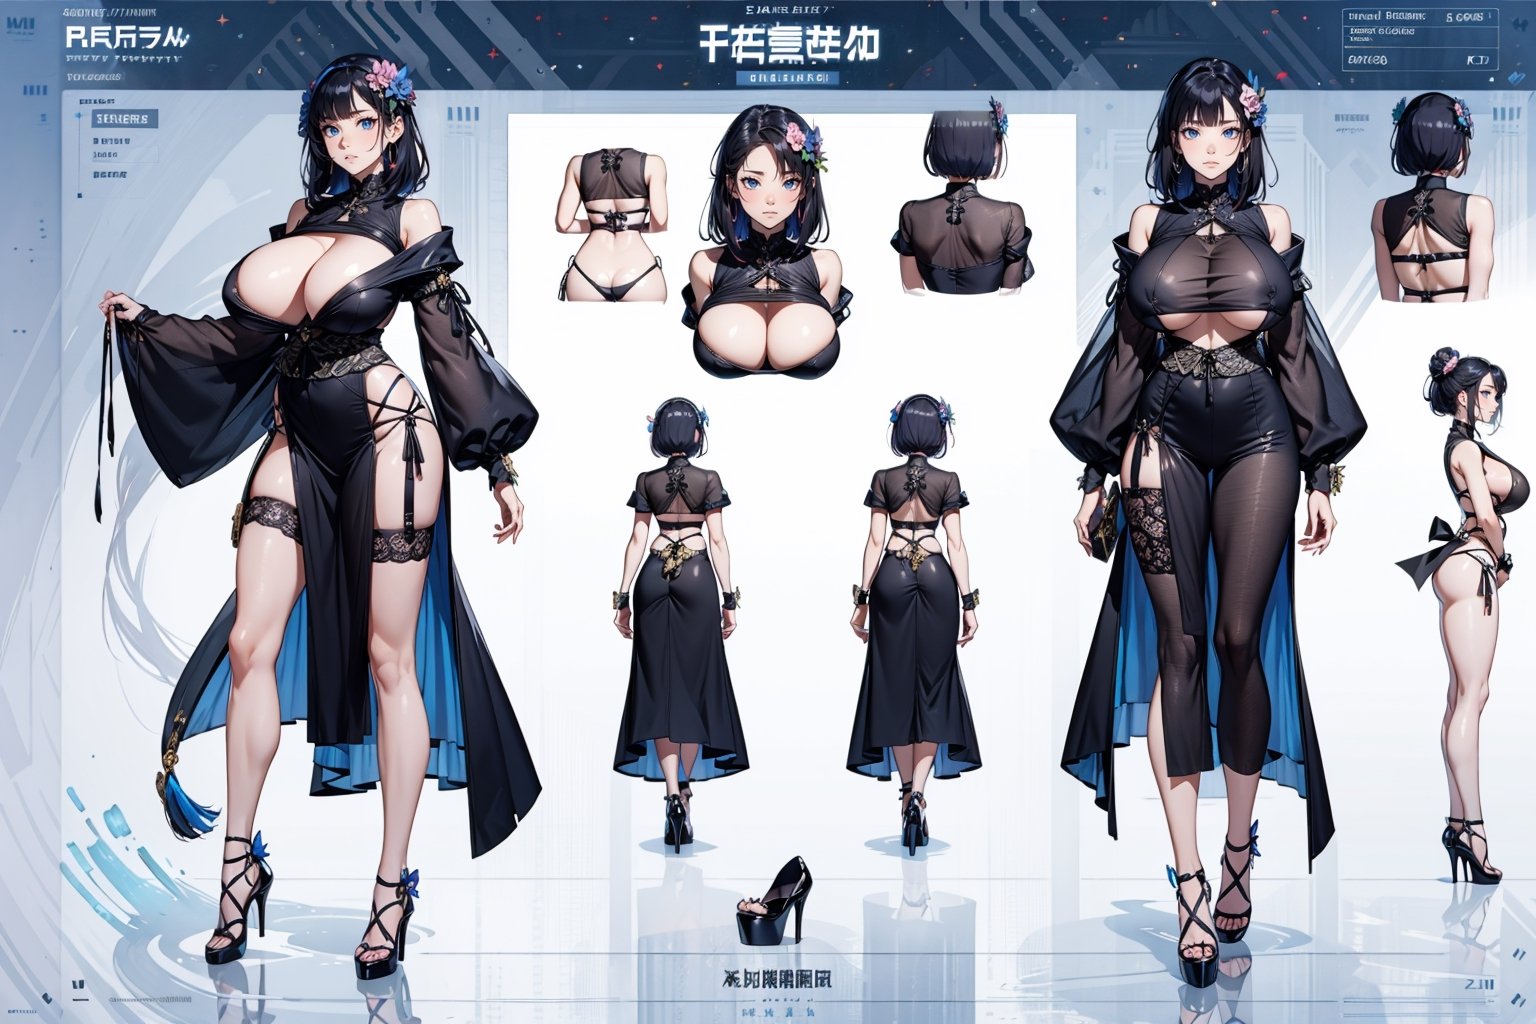 (masterpiece), (best quality), (ultra-detailed), 
woman, white skin, shiny skin, shiny body, 
gigantic breast, beautiful breast shape, 
Tear Drop breast, smile, 
black kimono, lace trim, high heels,

white background, charactersheet, full body, multiple views full body upper body, character design, front view design, back view design, side_view_design,

,Milf, mature female, gigantic sagging breasts,
large breasts, gigantic breasts, sagging breasts,upshirt